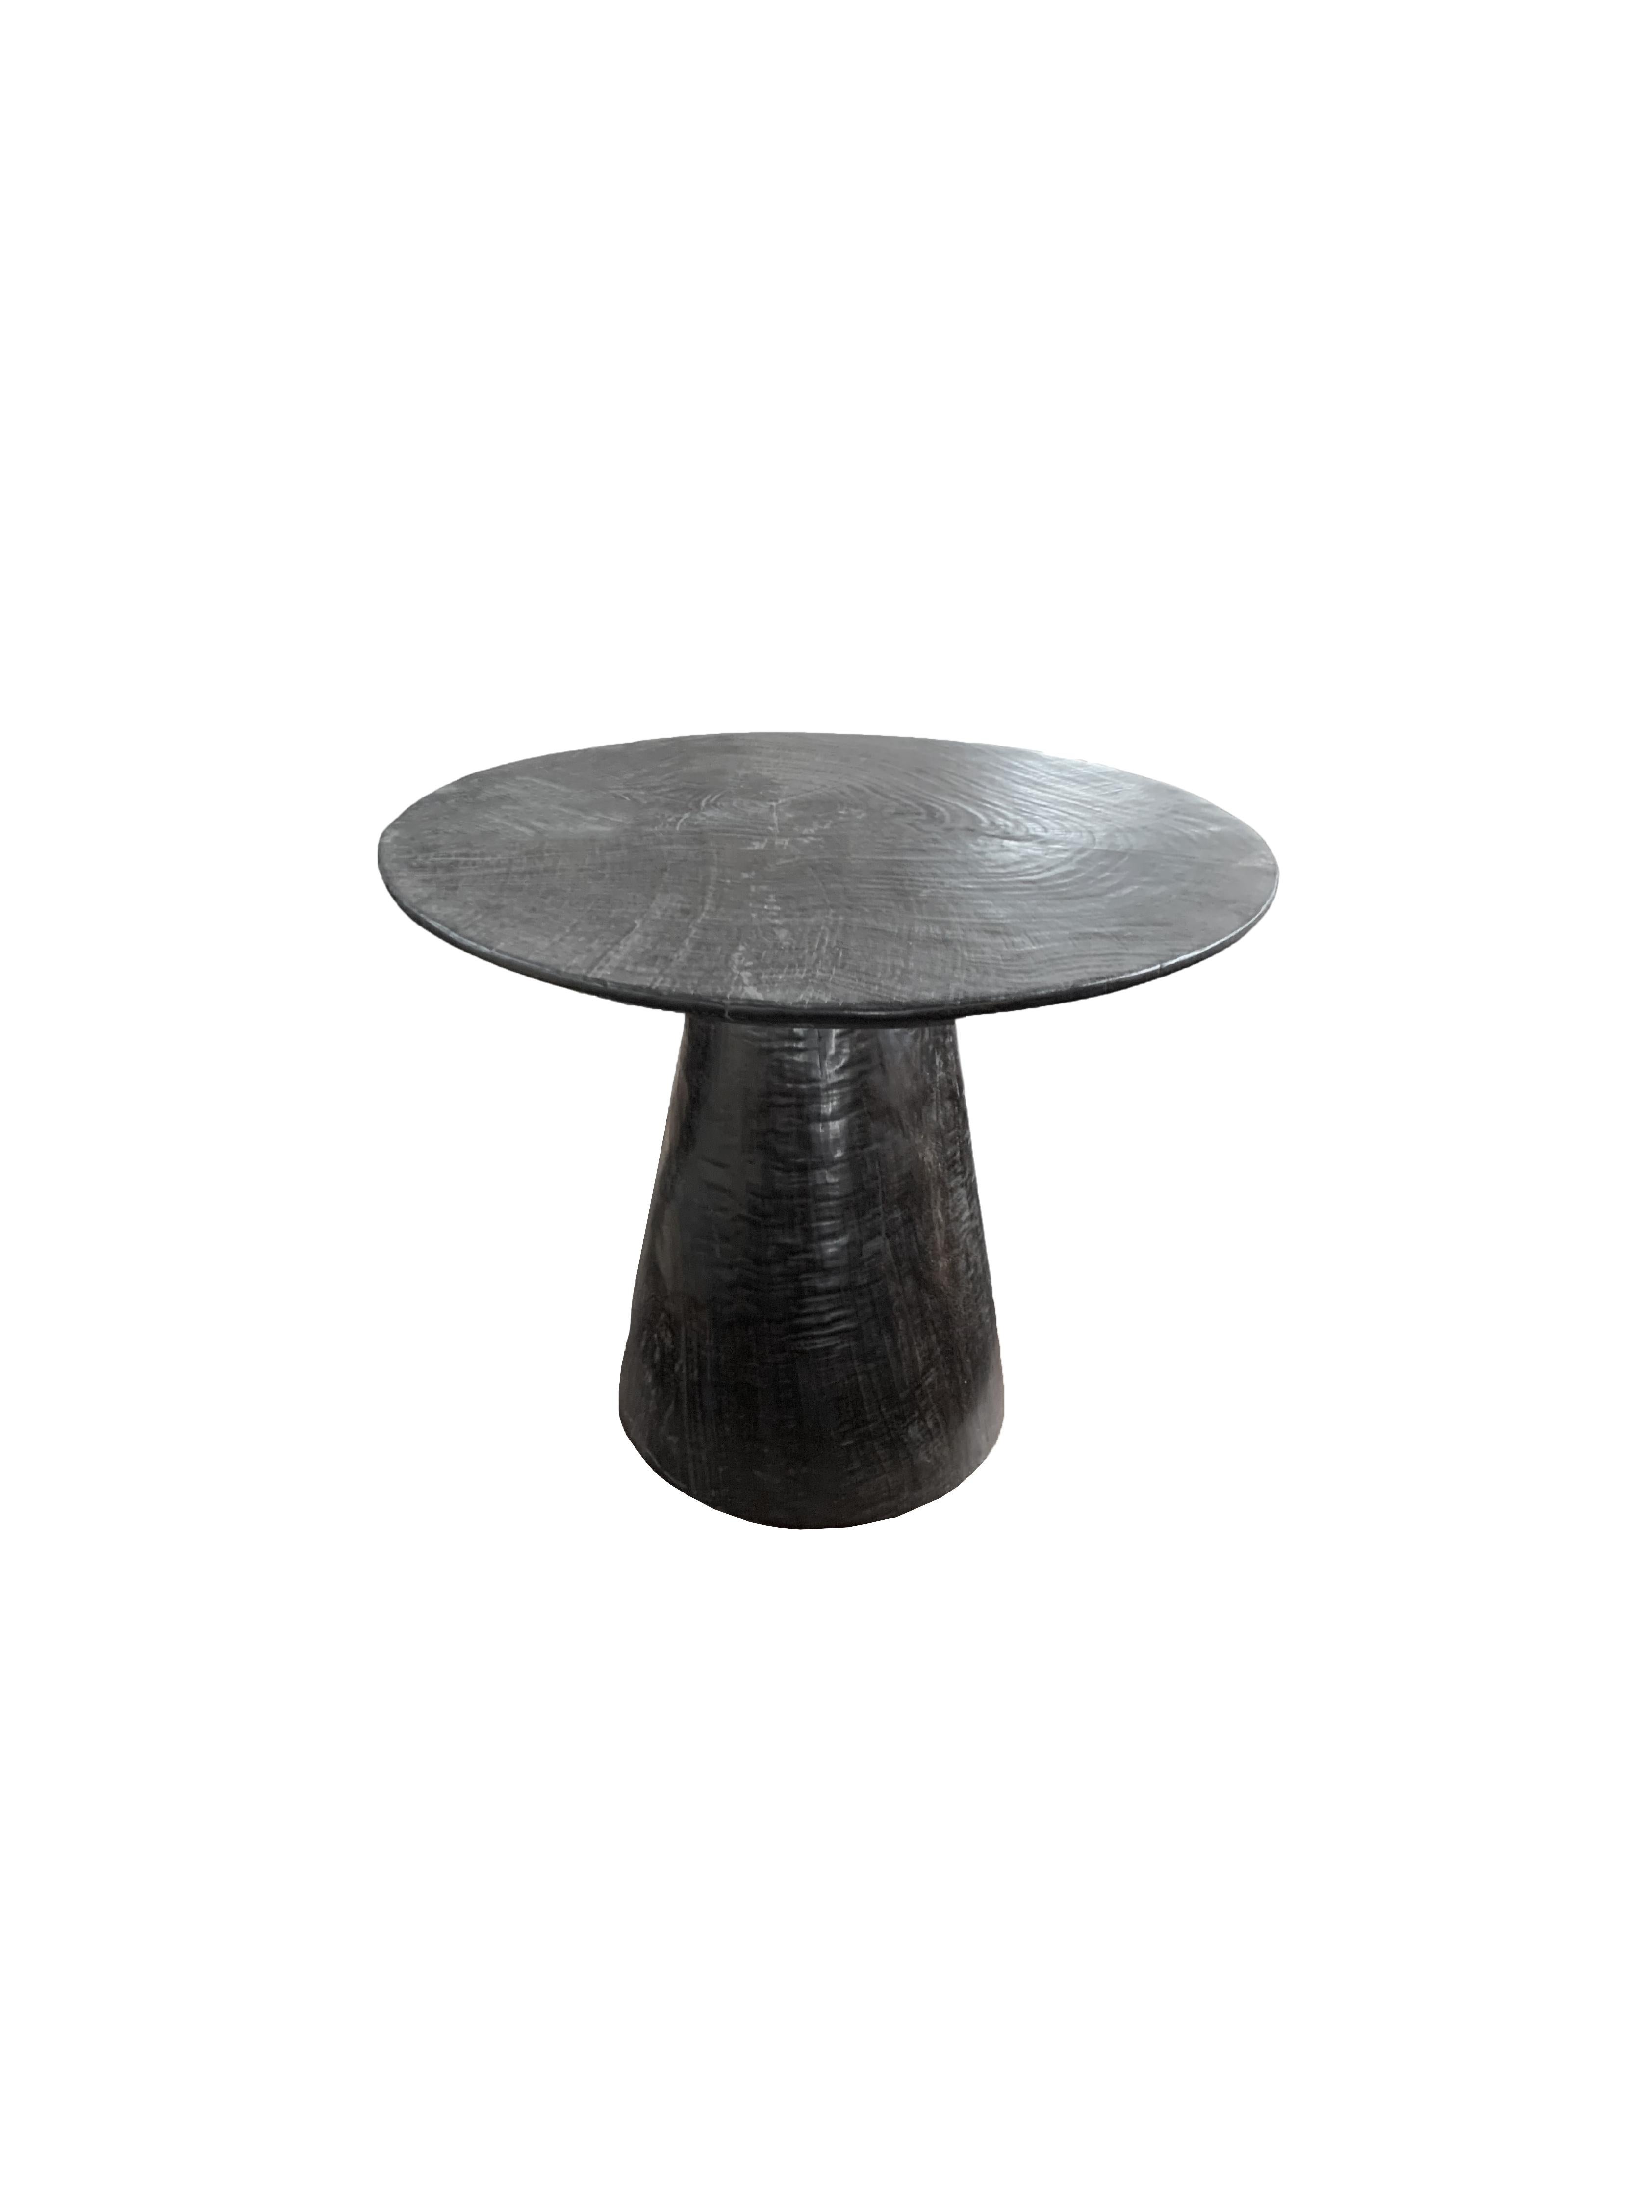 Indonesian Sculptural Round Table Crafted from Mango Wood, Burnt Finish, Modern Organic For Sale